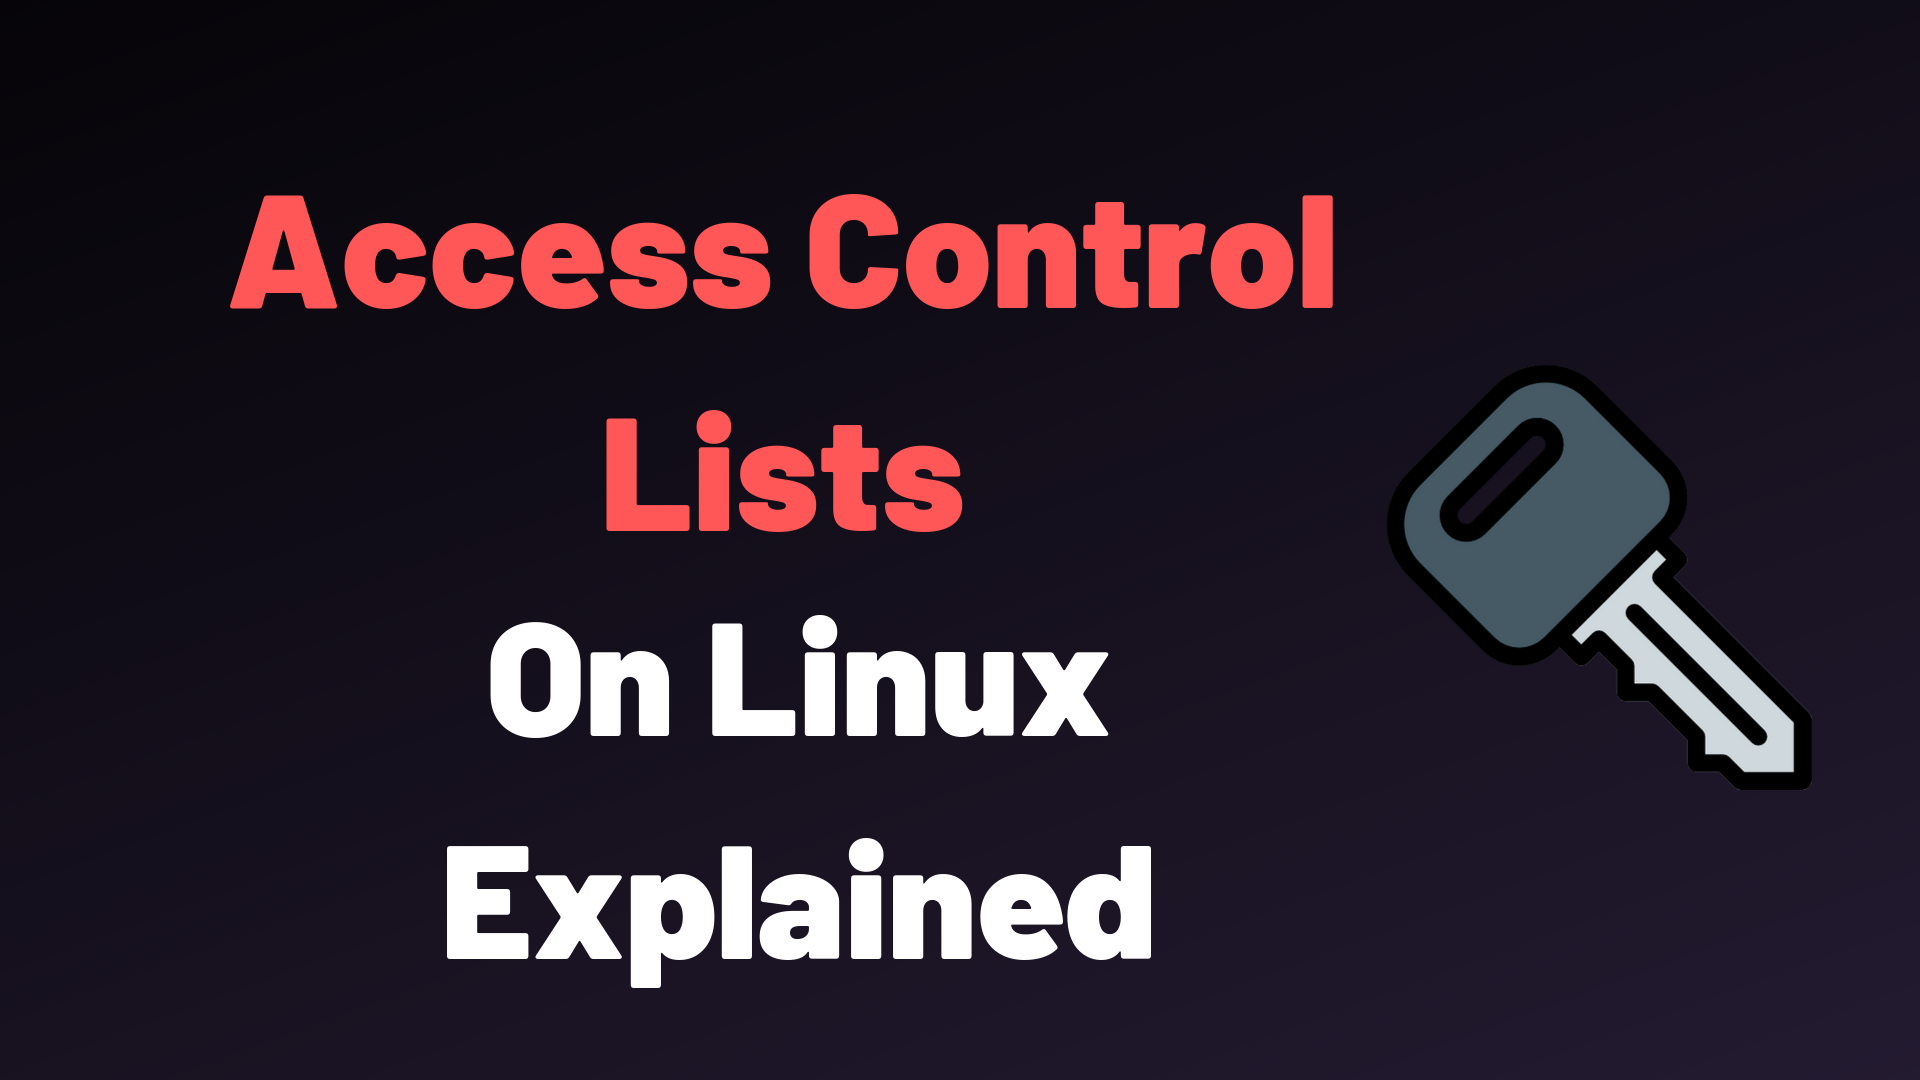 Access Control Lists on Linux Explained